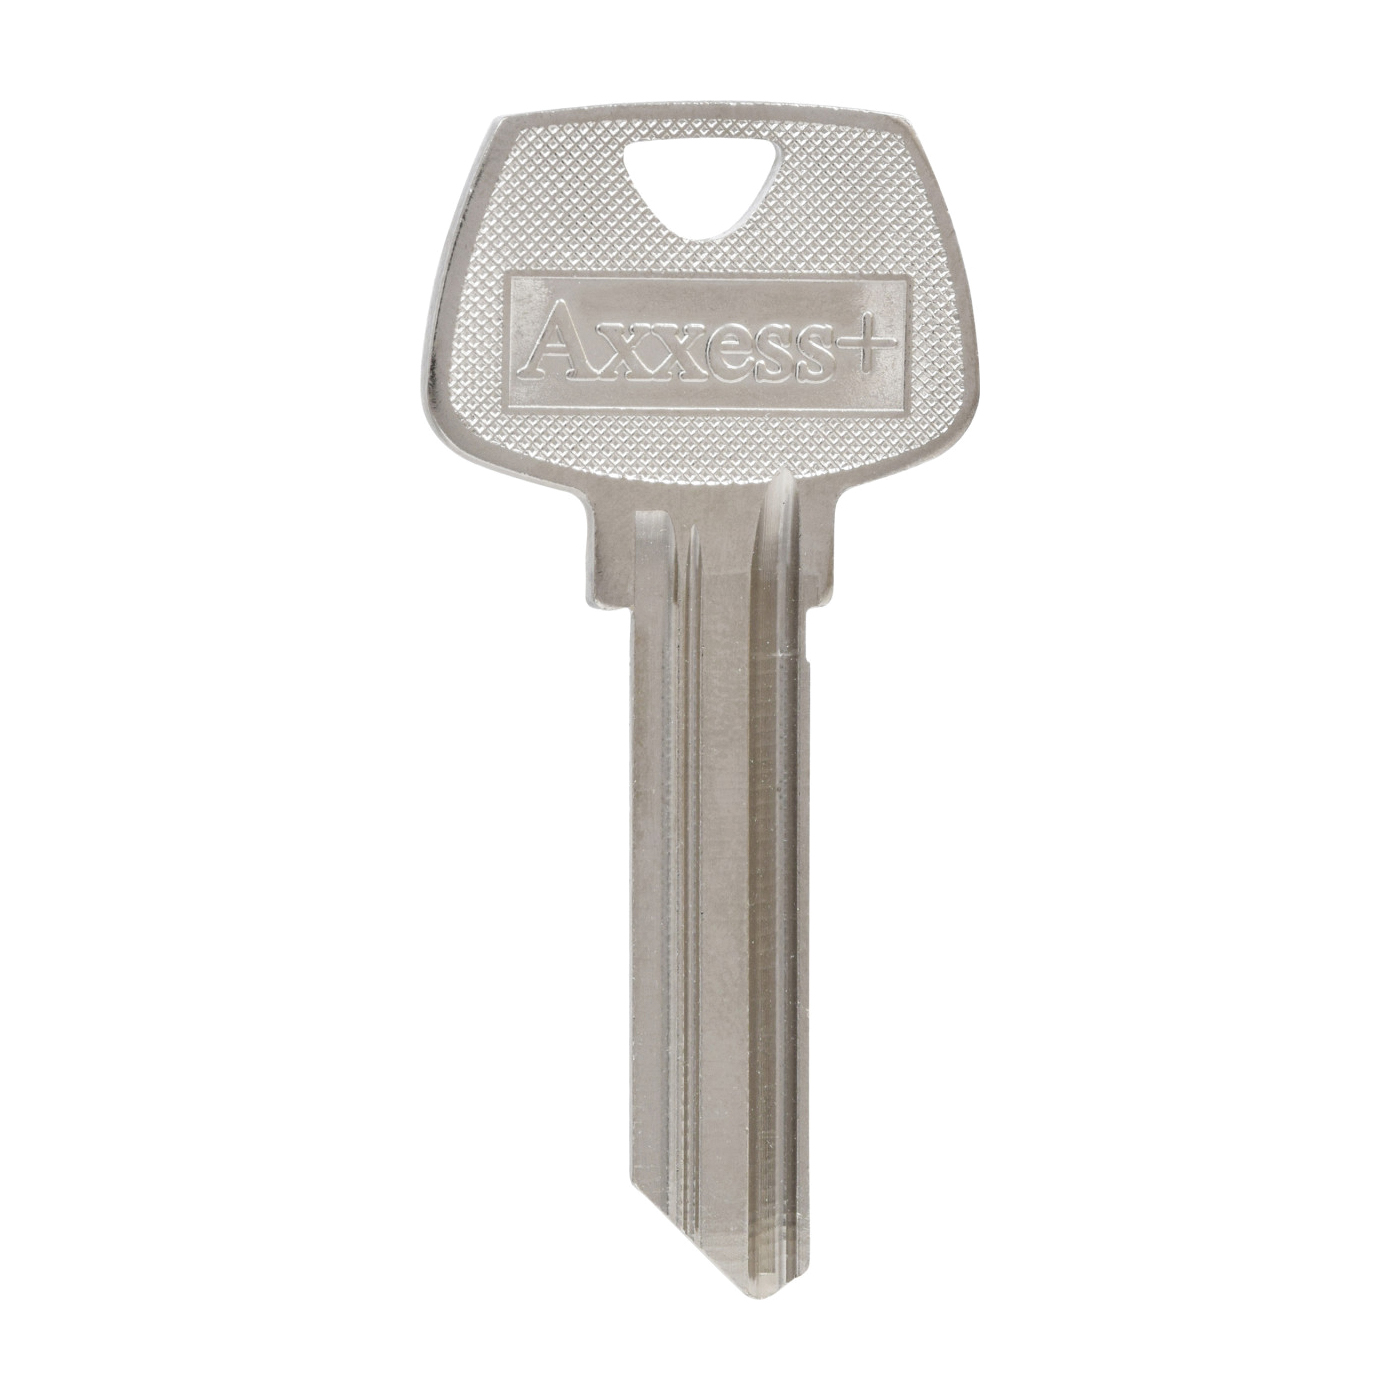 88550 Key Blank, Brass, Nickel-Plated, For: Sargent Locks